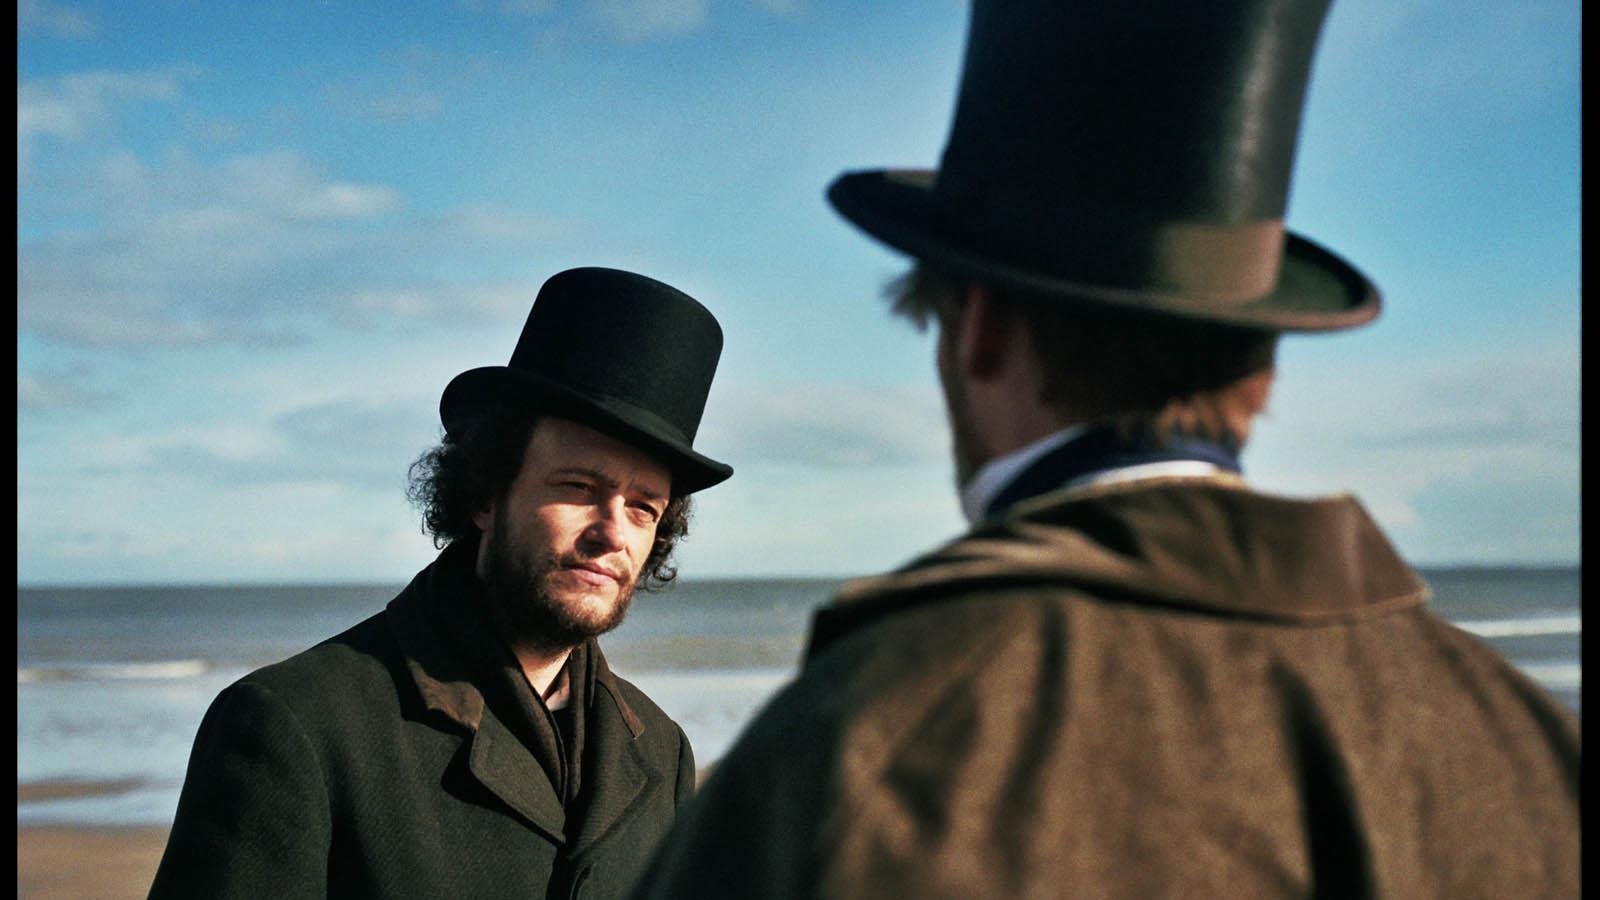 On a beach, two men wearing top hats face each other.